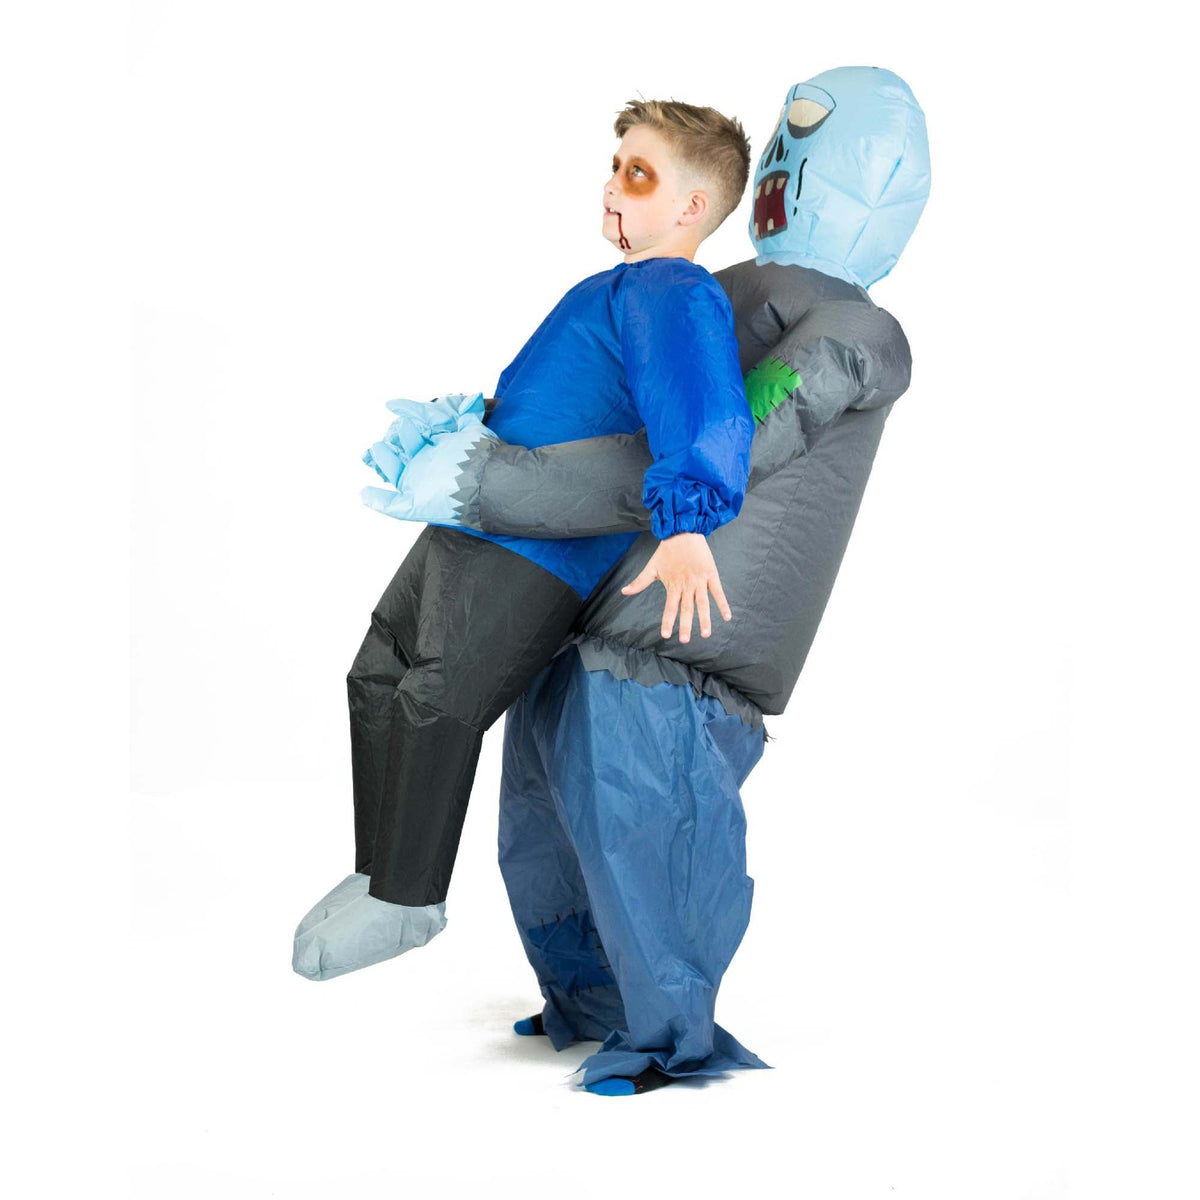 BODYSOCKS Costumes Inflatable Zombie Carrying You Costume for Kids